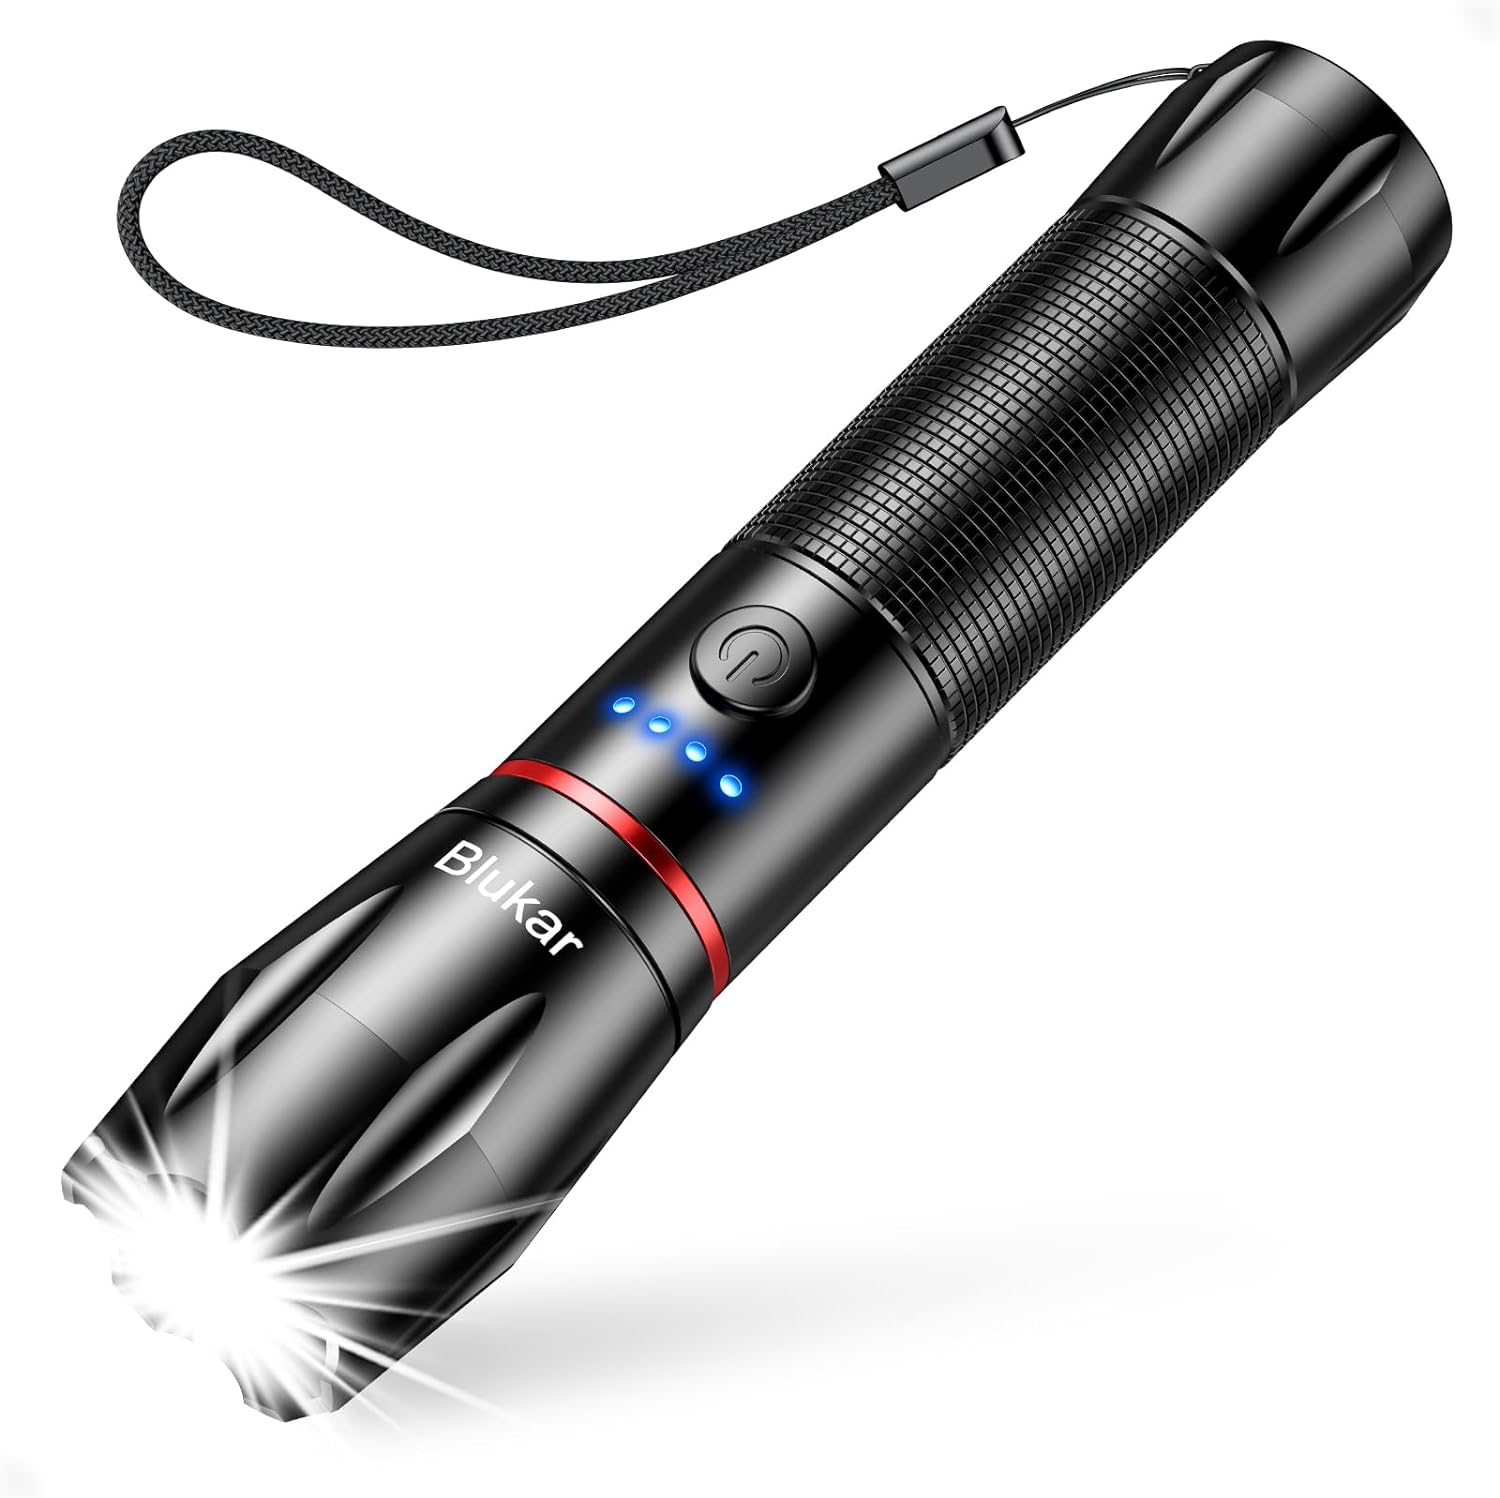 Blukar Waterproof Lightweight Mini Handheld LED Torch Rechargeable with Adjustable Focus & 5 Modes